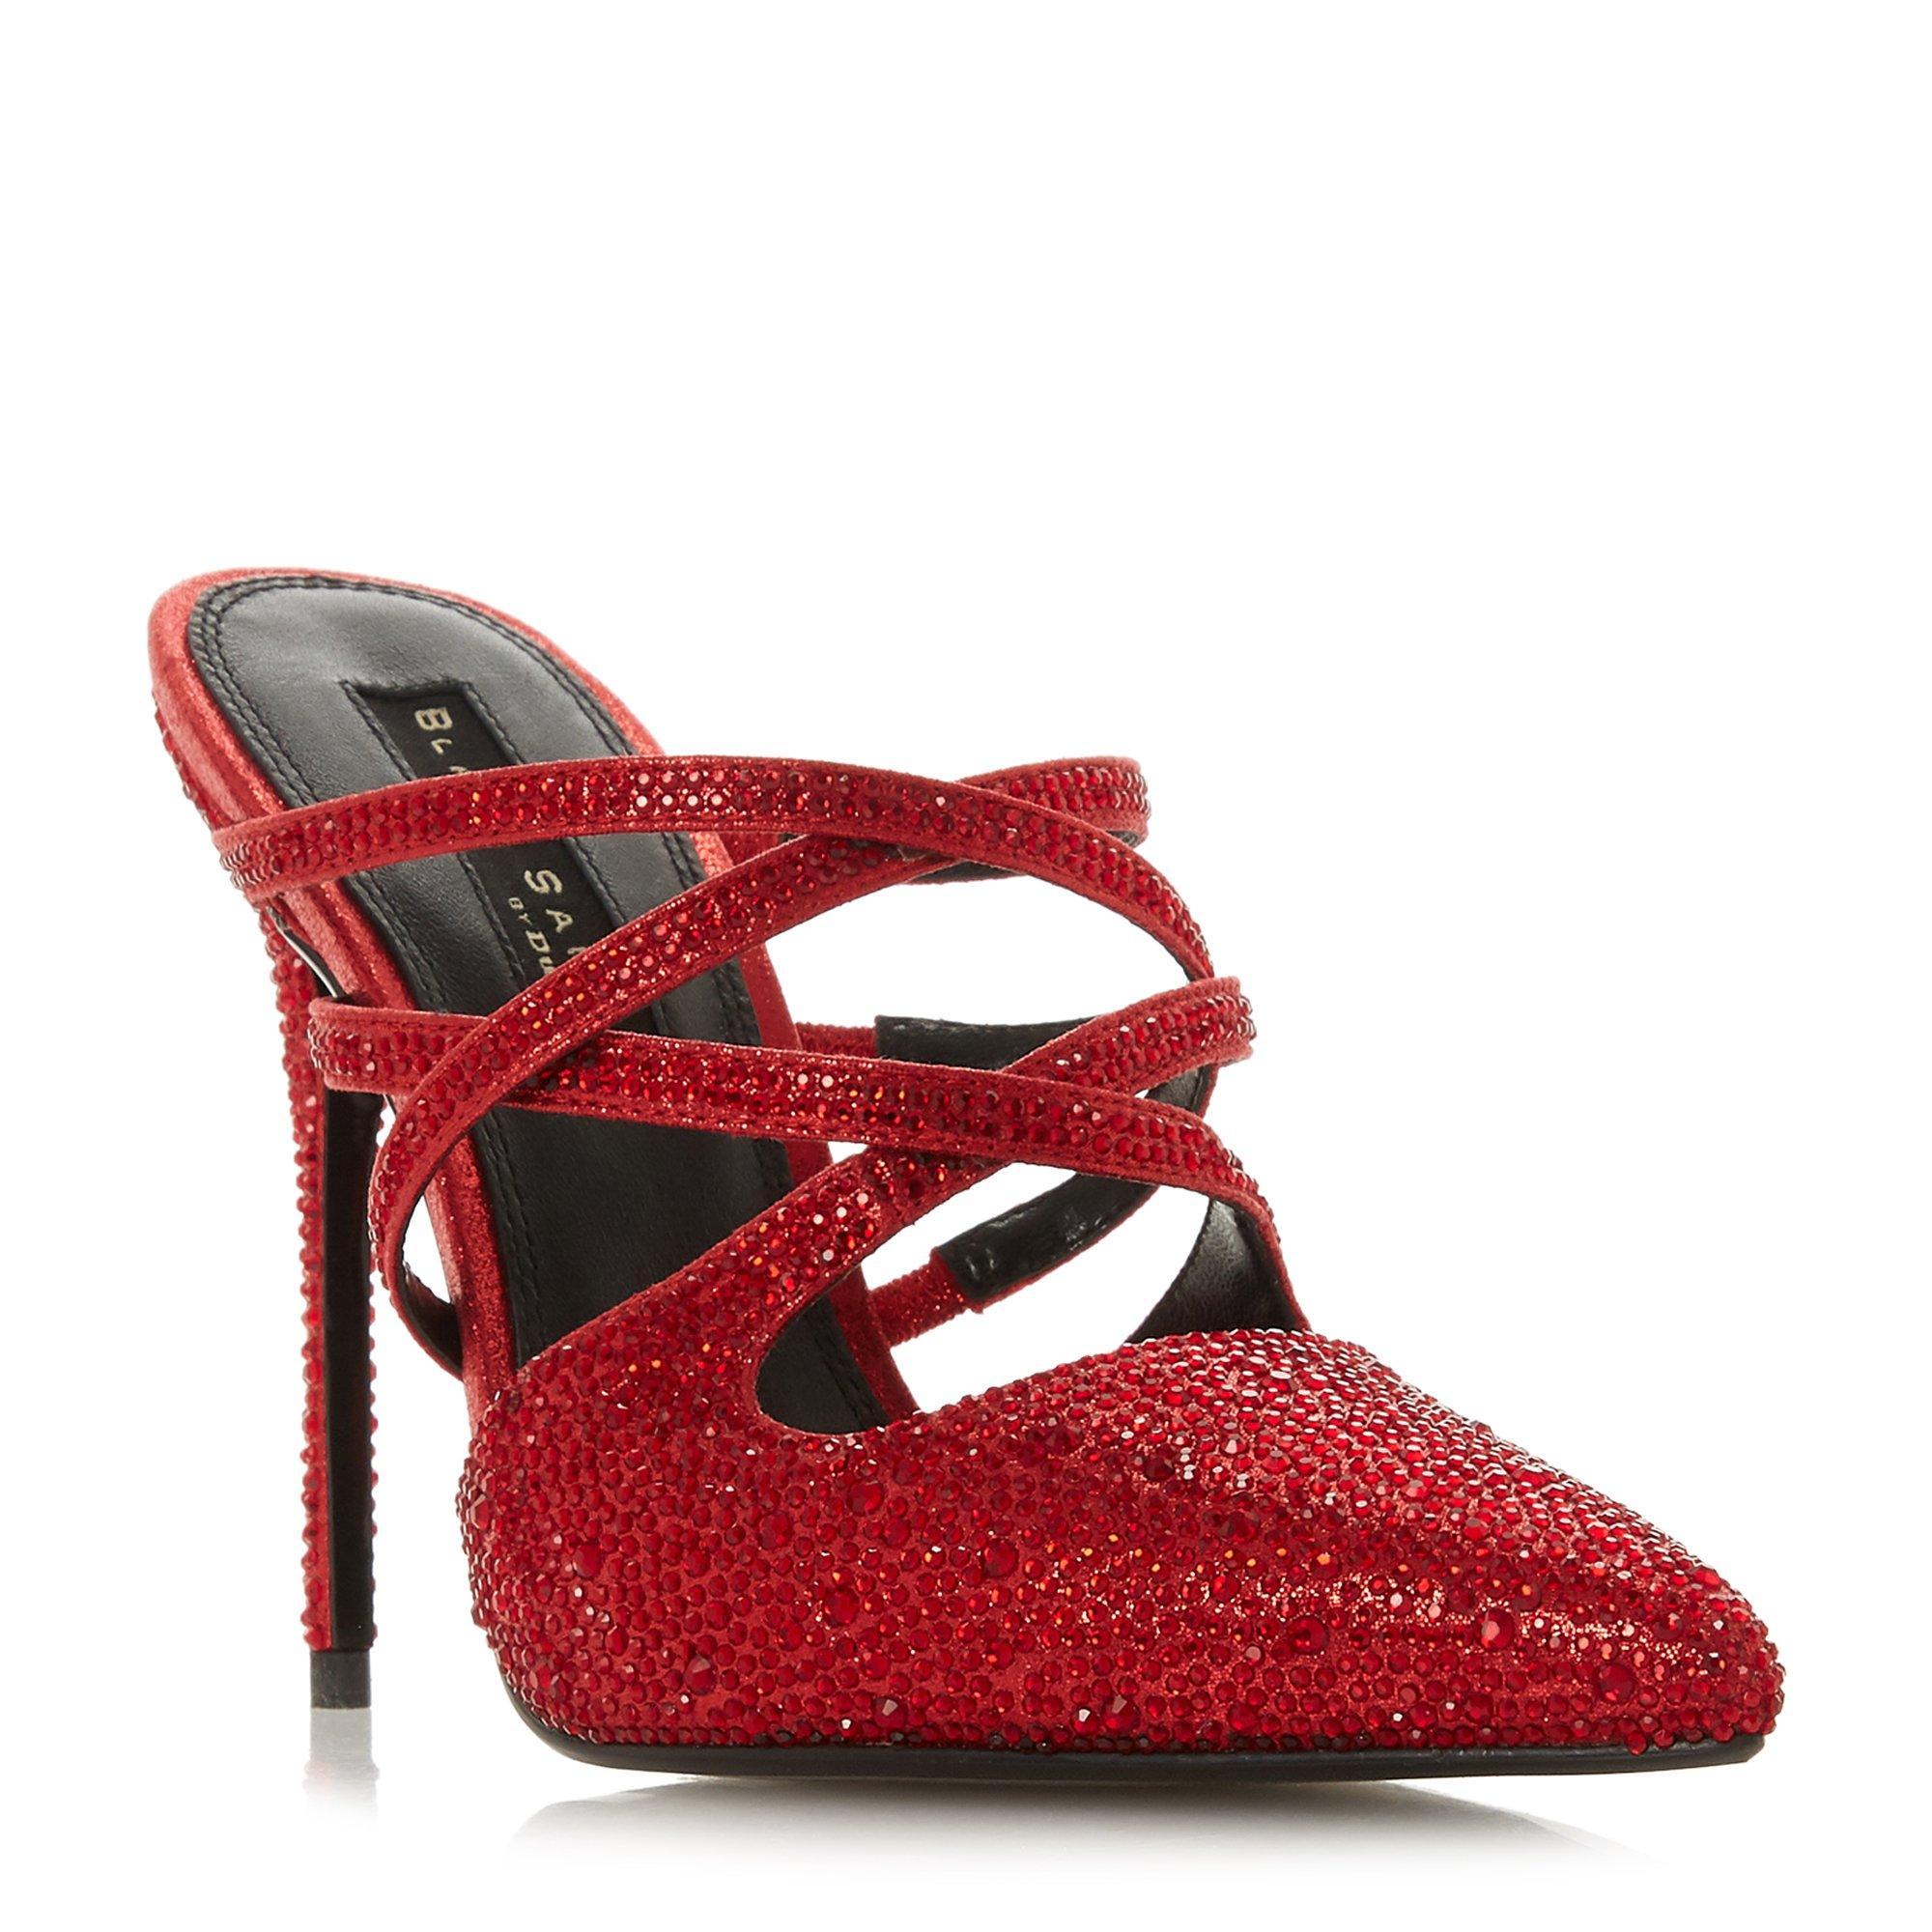 Dune Leather Charlotta Embellished High Heel Mule Court Shoes in Red - Lyst